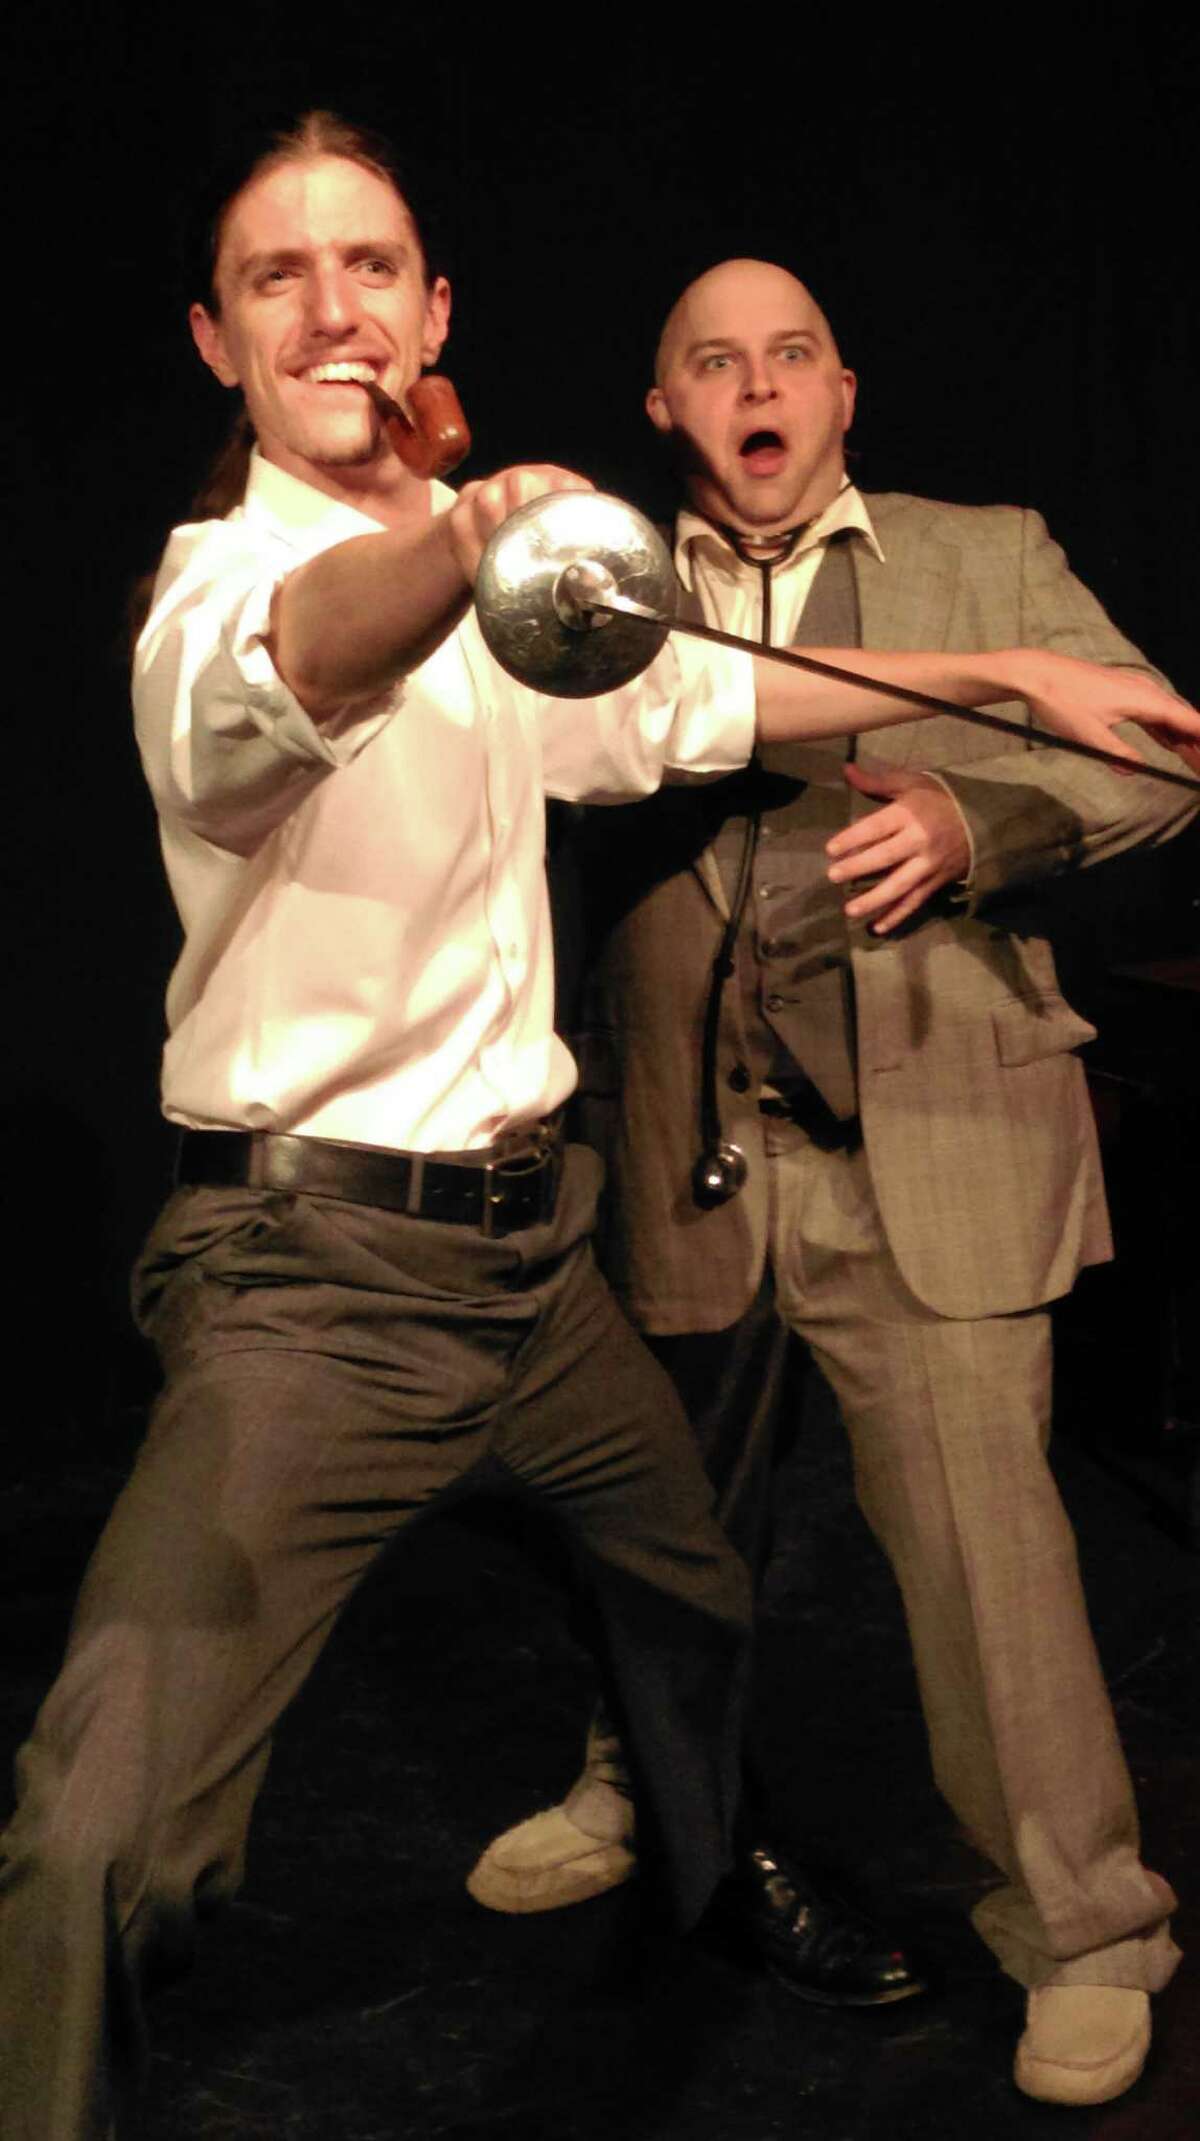 Joseph Travis Urick and Benjamin Scharff star in "You've Ruined a Perfectly Good Mystery" at the Rose Theatre Company.